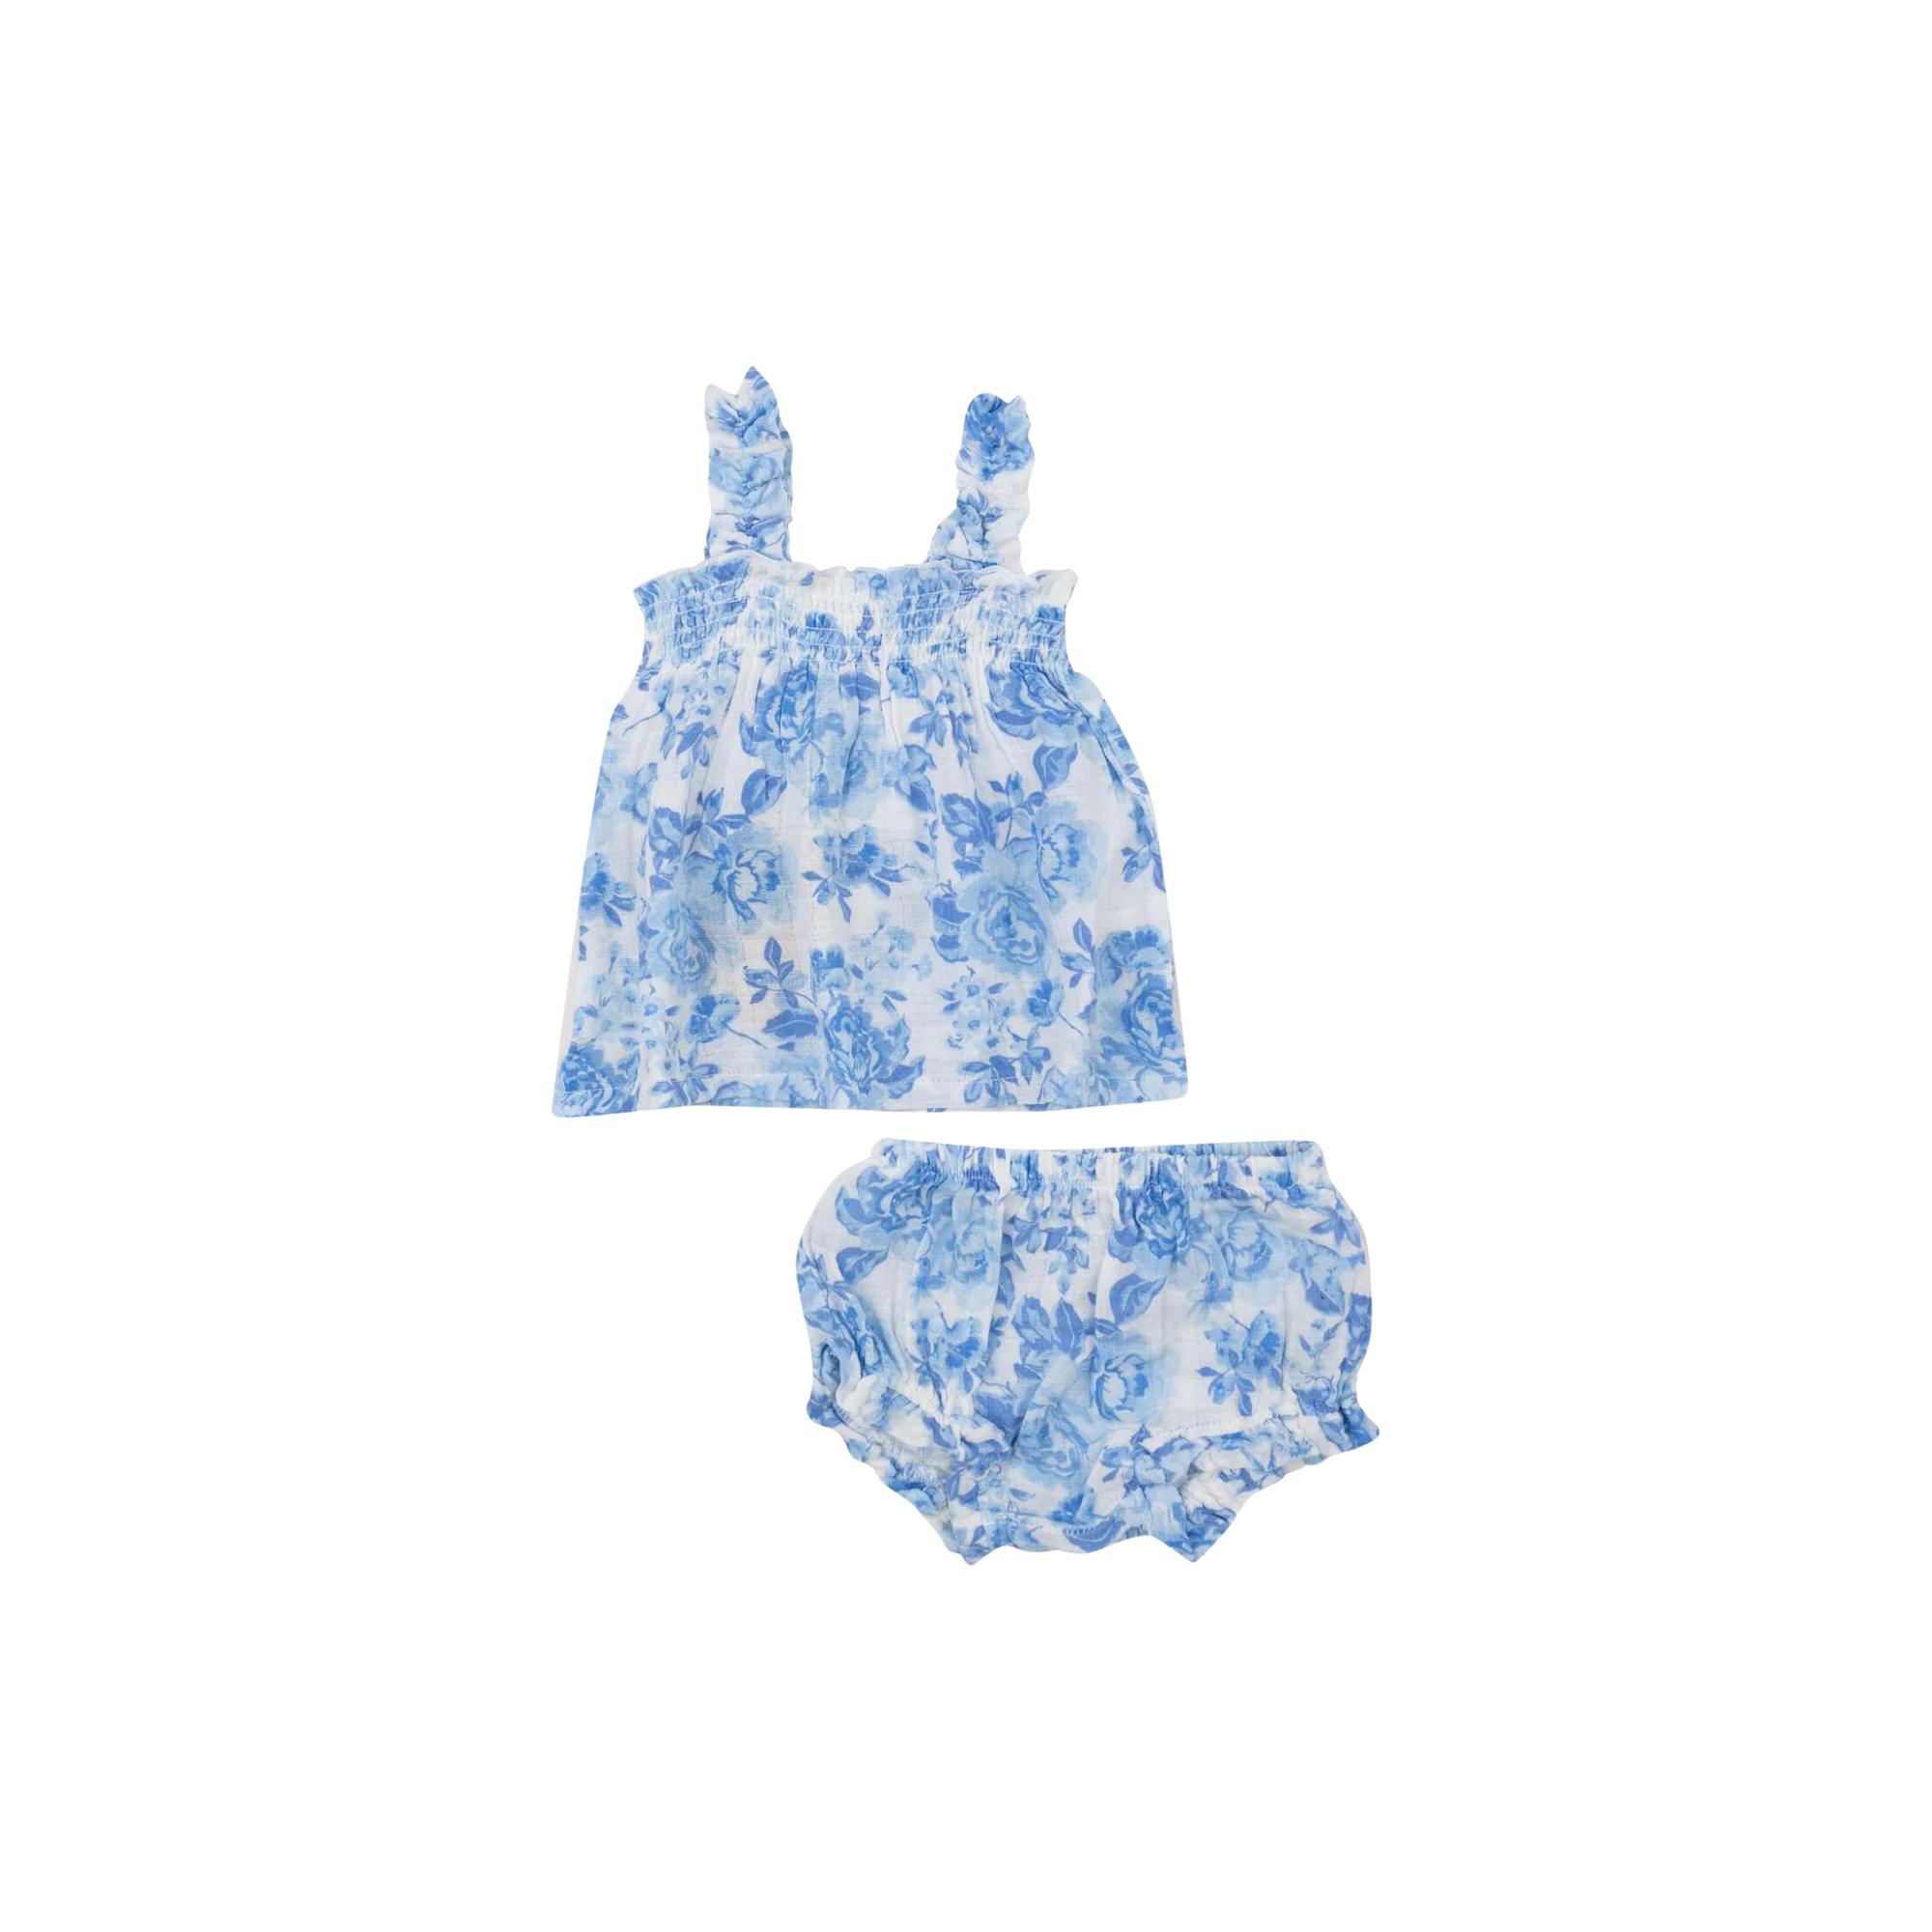 Roses In Blue Ruffly Strap Top + Bloomer Set